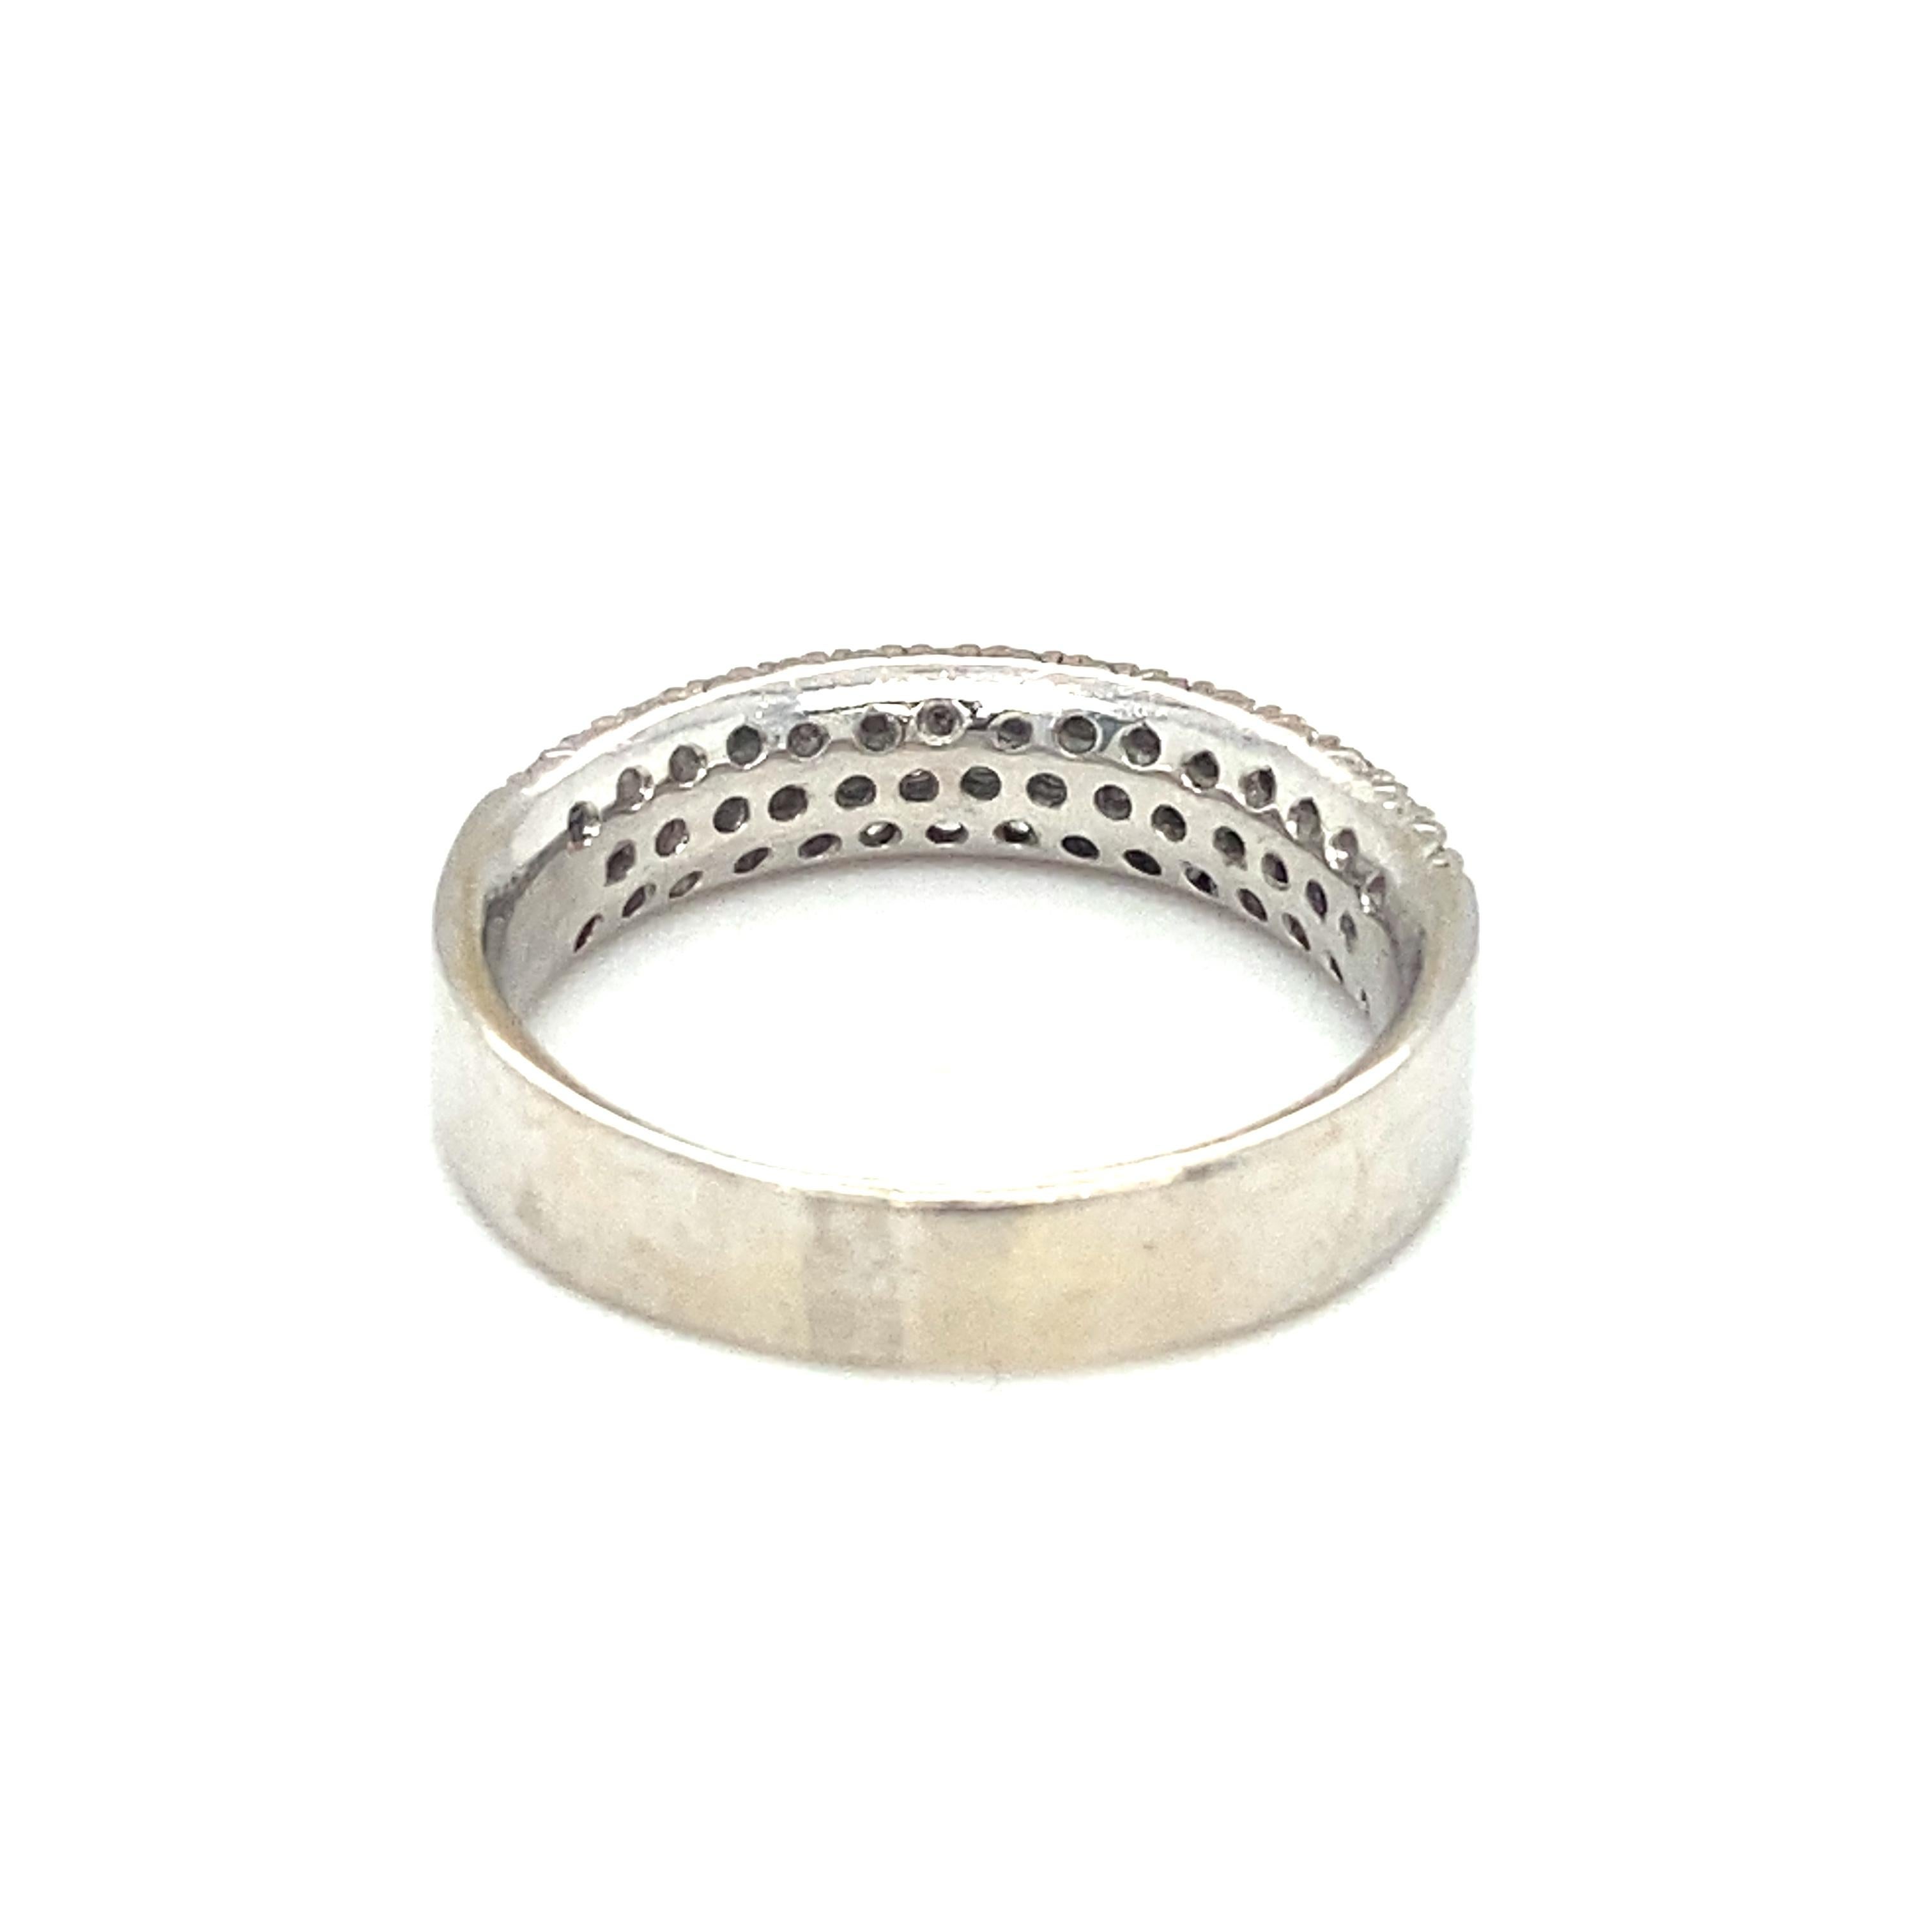 Item Details: This three row band can be worn stacked with other bands or alone as a wedding ring.

Circa: 1990s
Metal Type: 18k white gold
Weight: 5.1g
Size: US 7.75, slightly resizable

Diamond Details:
Carat: 1.0 carat total weight
Cut: